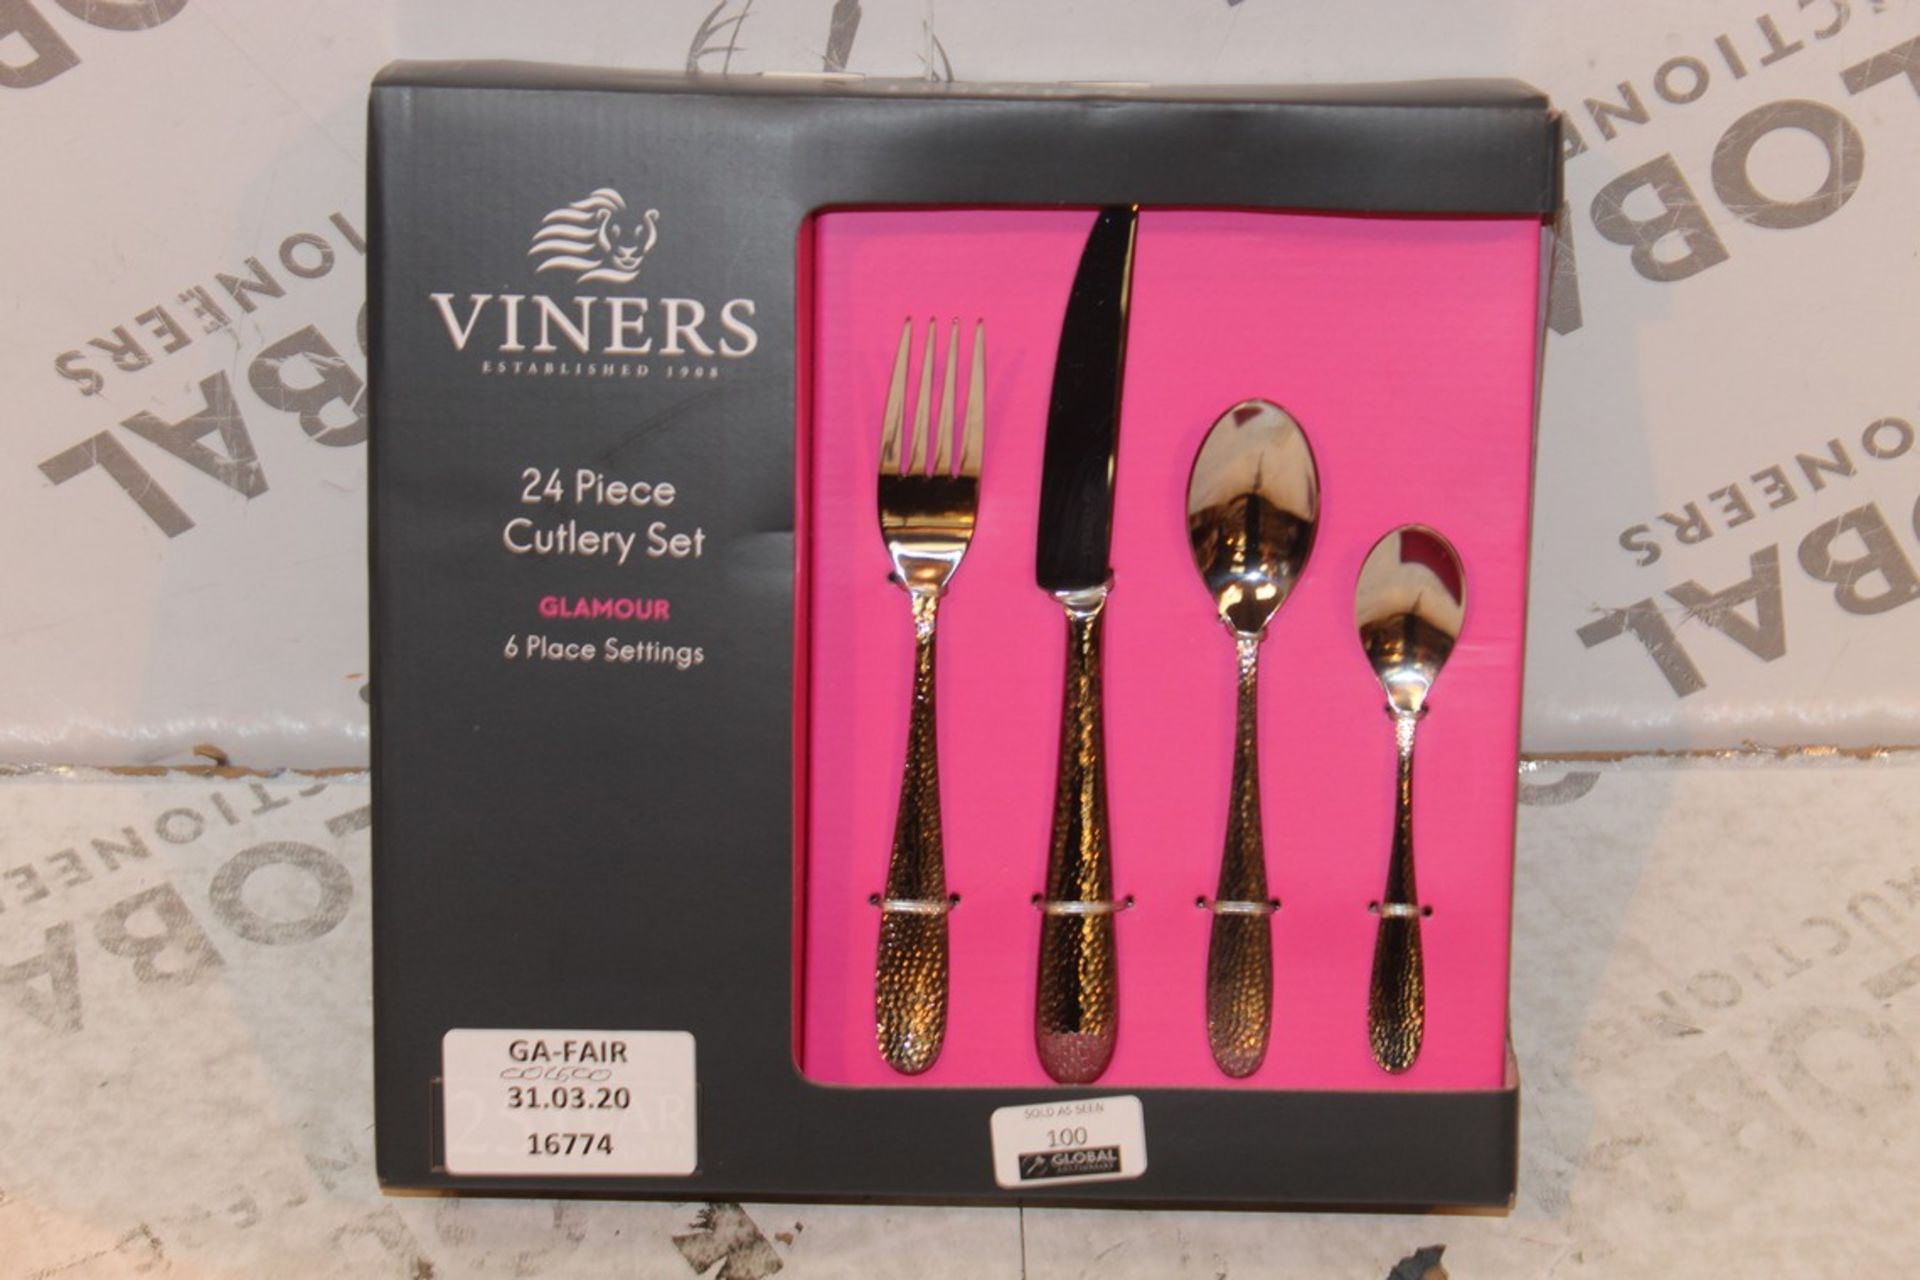 Boxed Viner's 24 Piece Glamour Cutlery Set RRP £25 (16774) (Appraisals Available Upon Request)